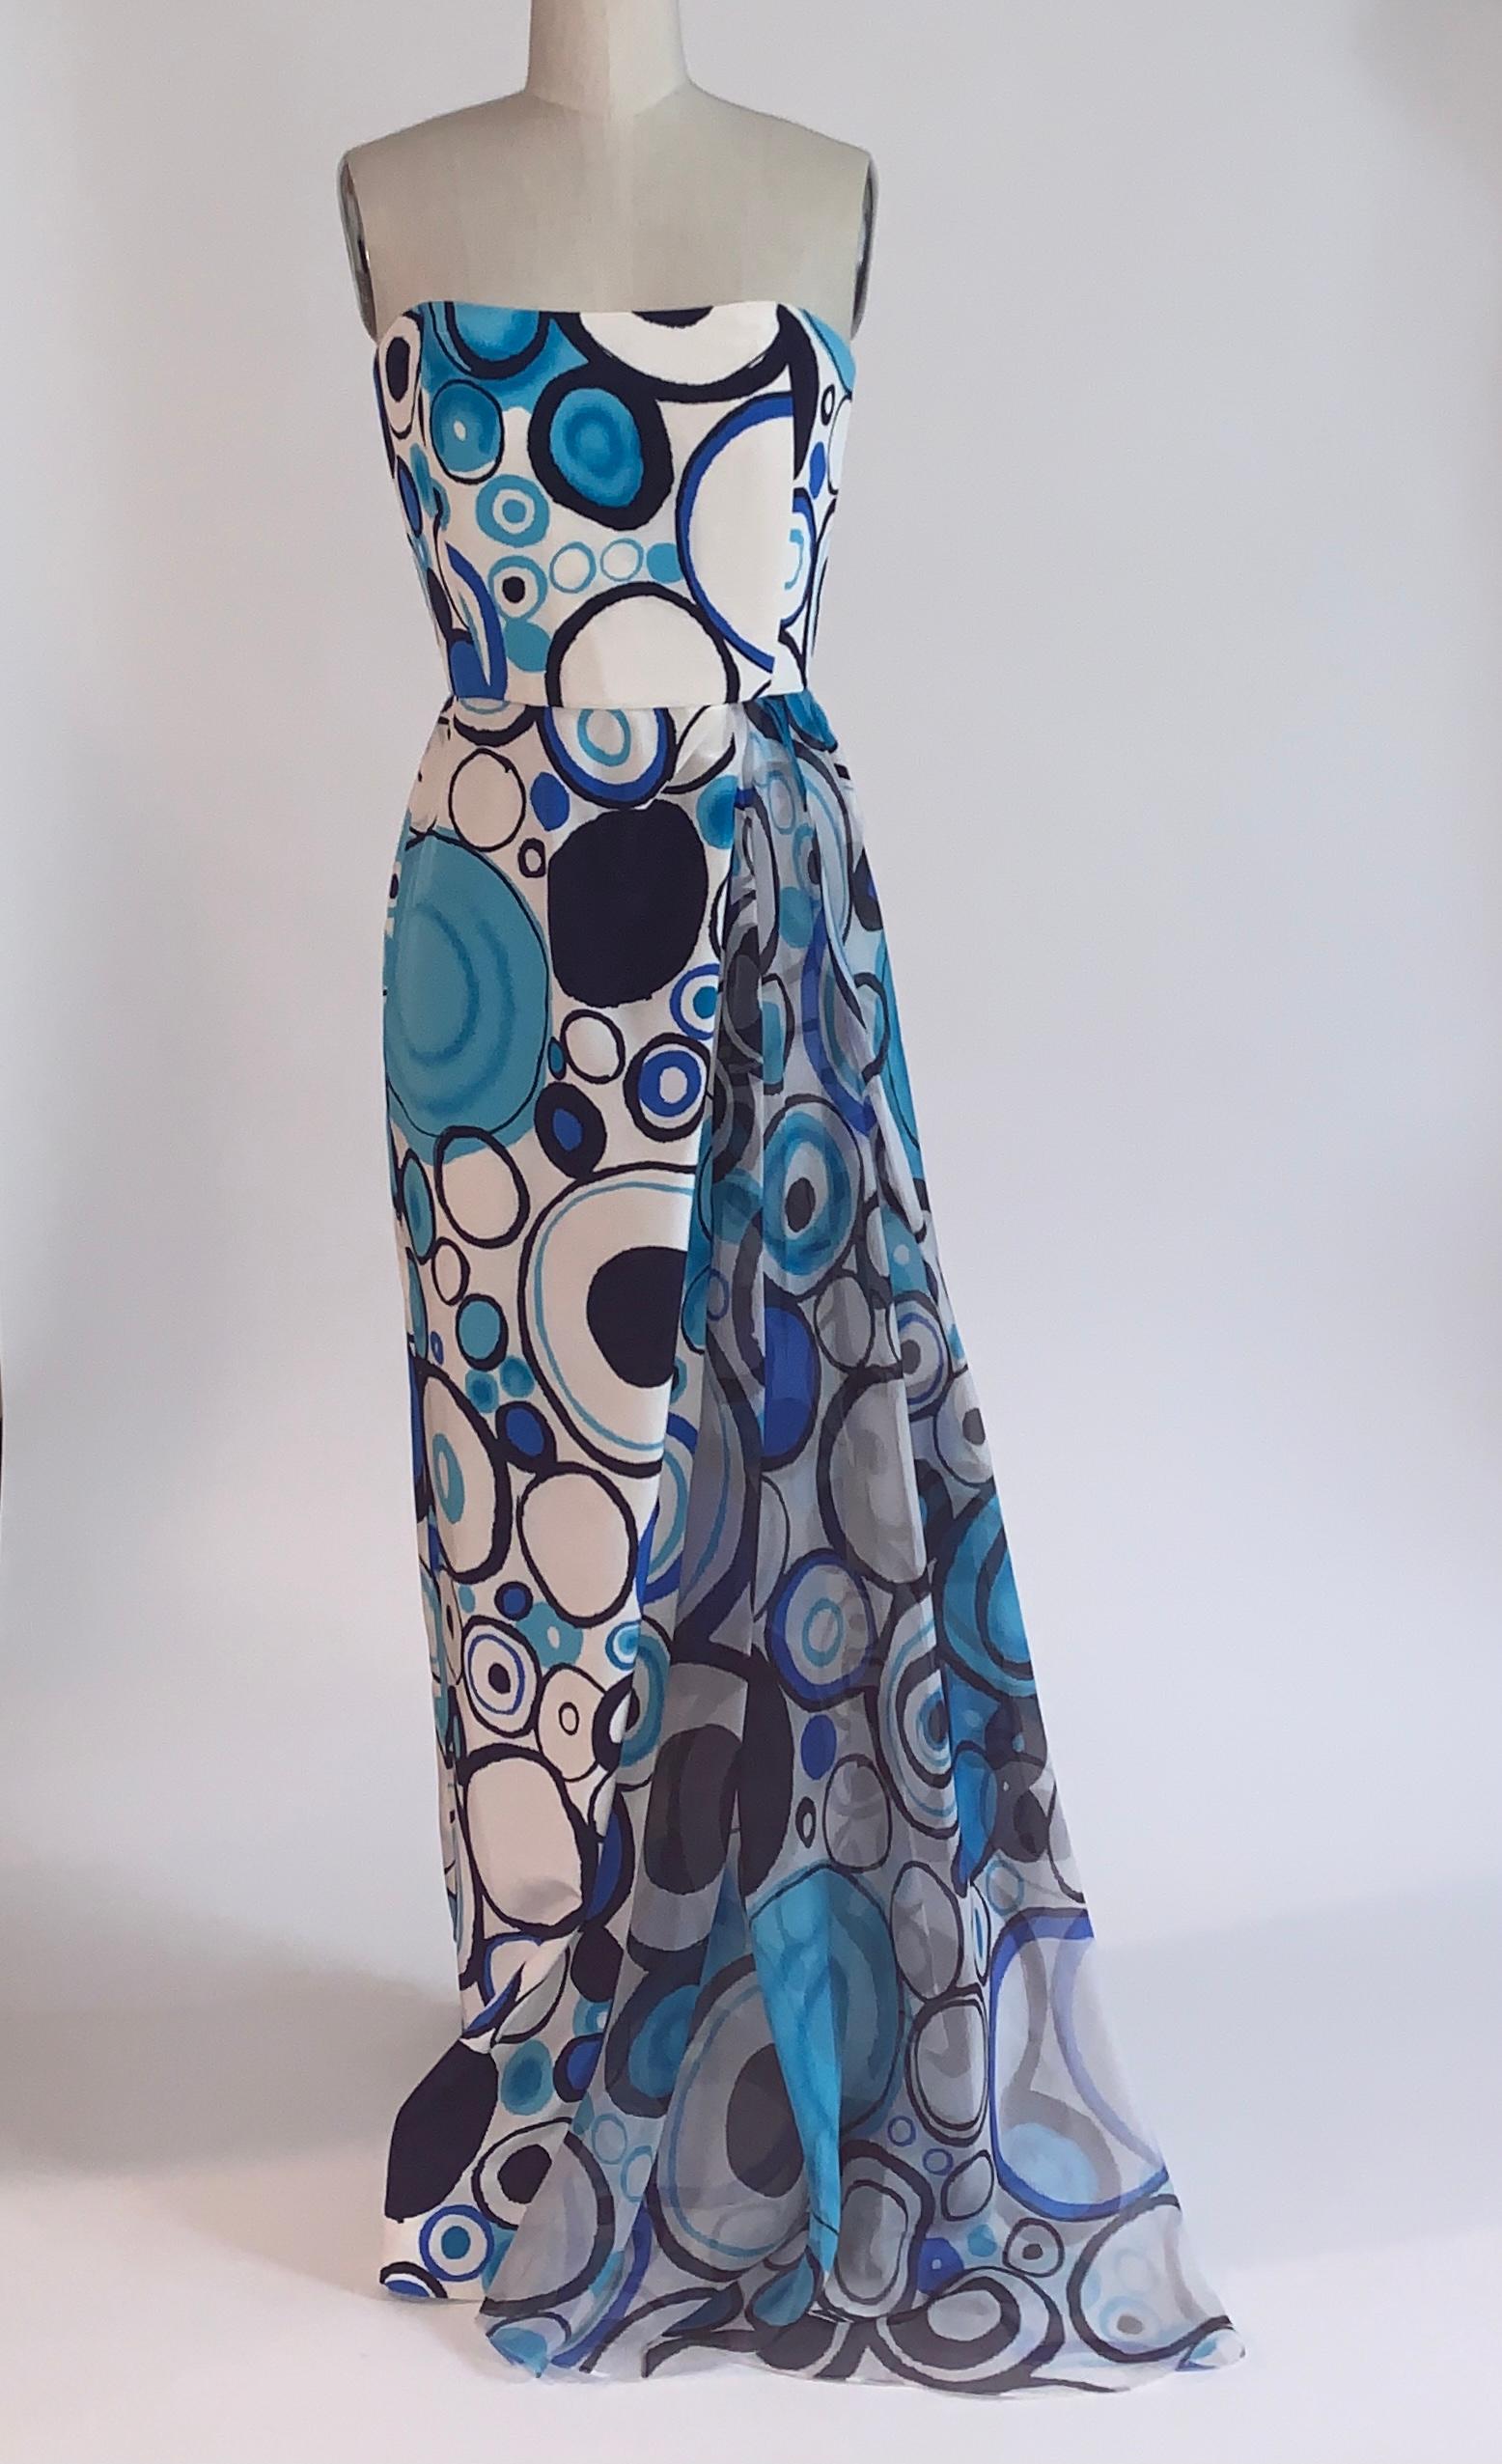 Lily Samii blue and white strapless silk gown with abstract circle pattern throughout in bright and navy blues.  Draped chiffon panel at front. Side front slit behind drape. Boning at bodice. Back zip and hook and eye. 

Lily recently retired from